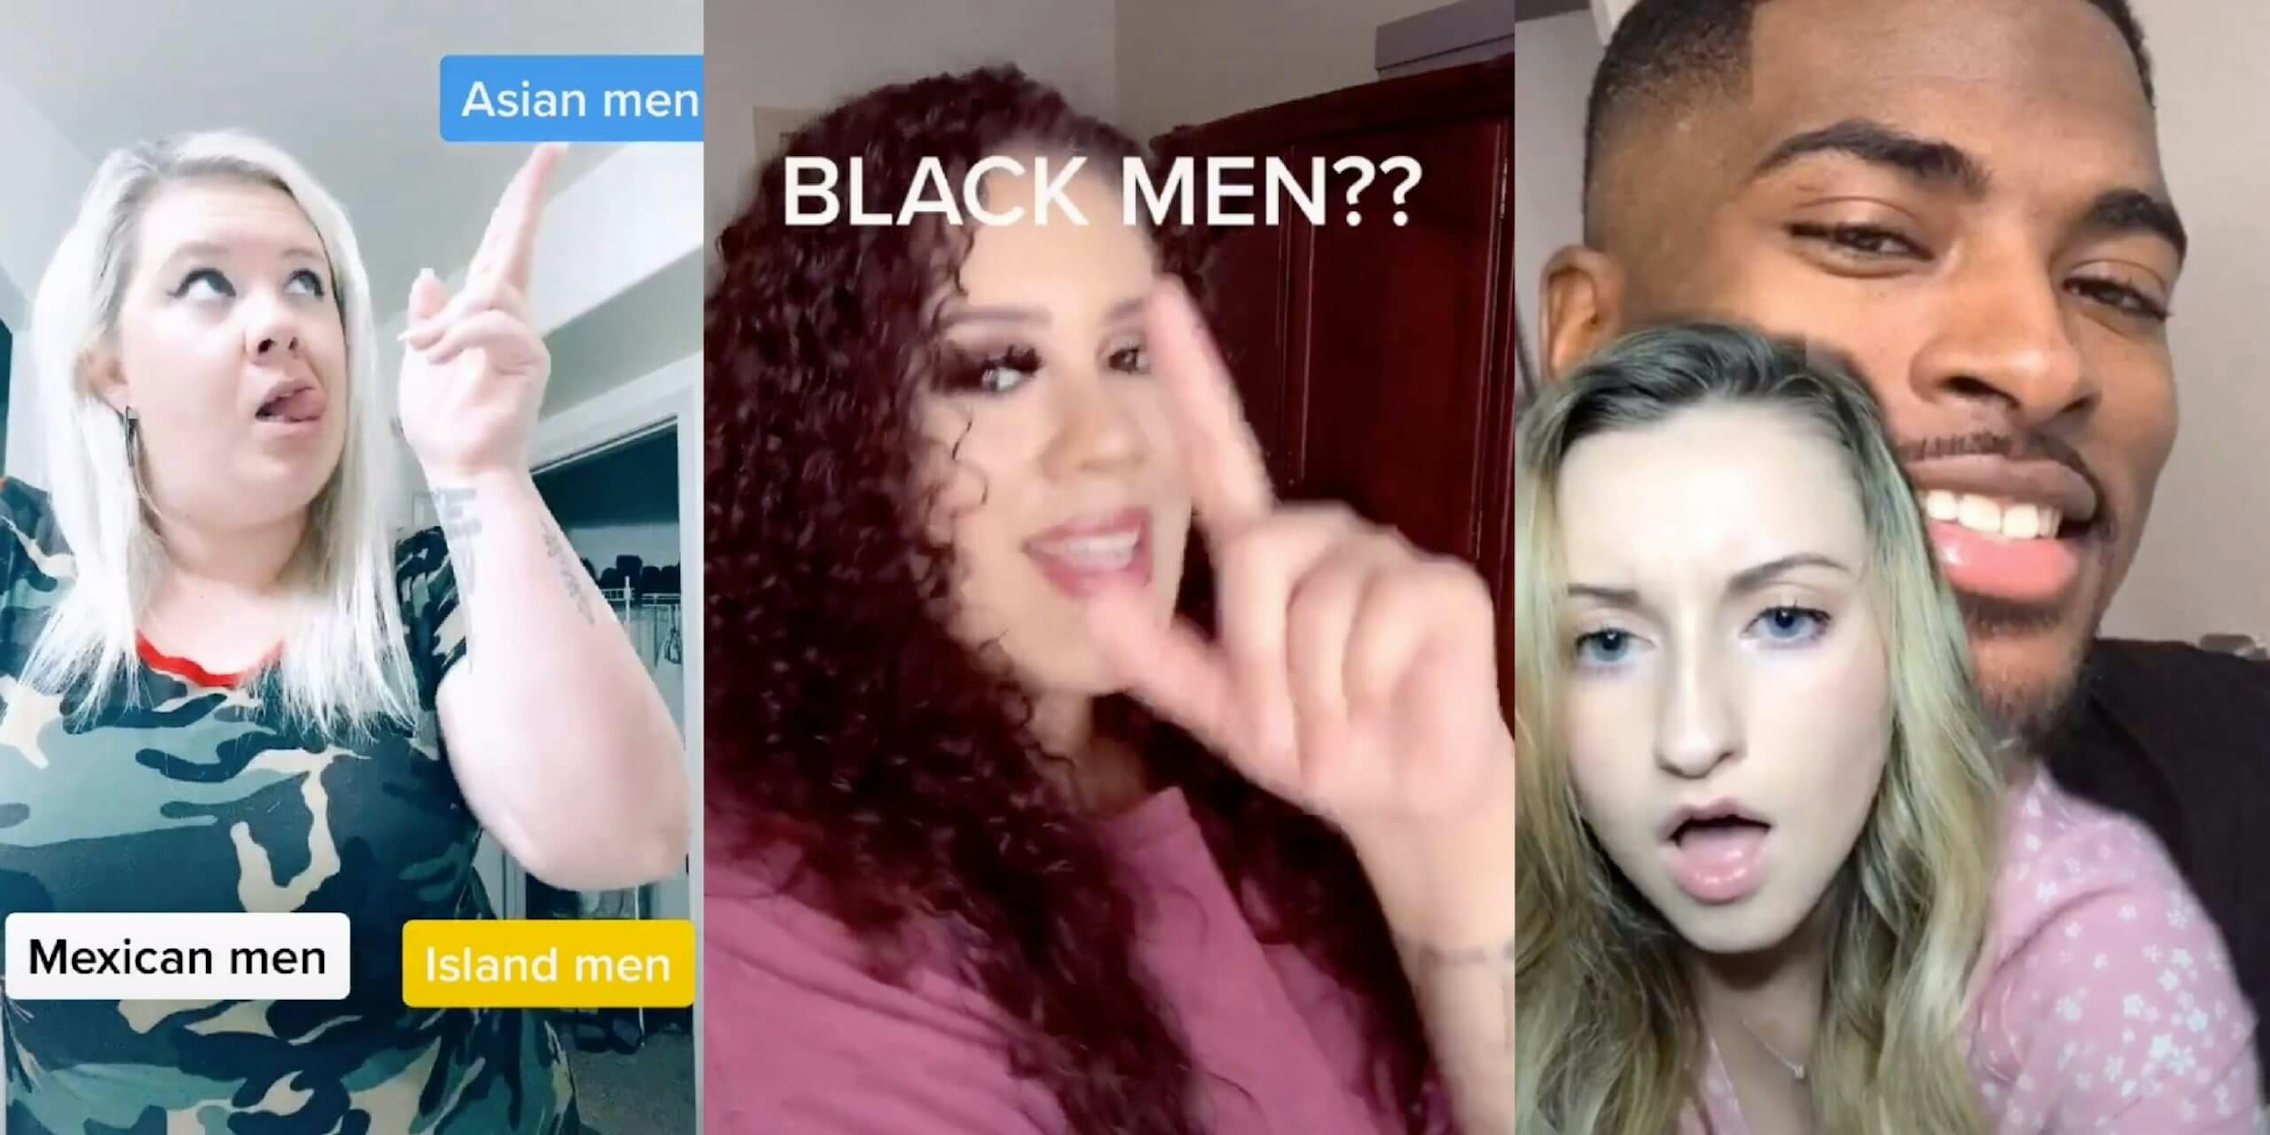 Three screenshots show different women commenting on their preference for Black men